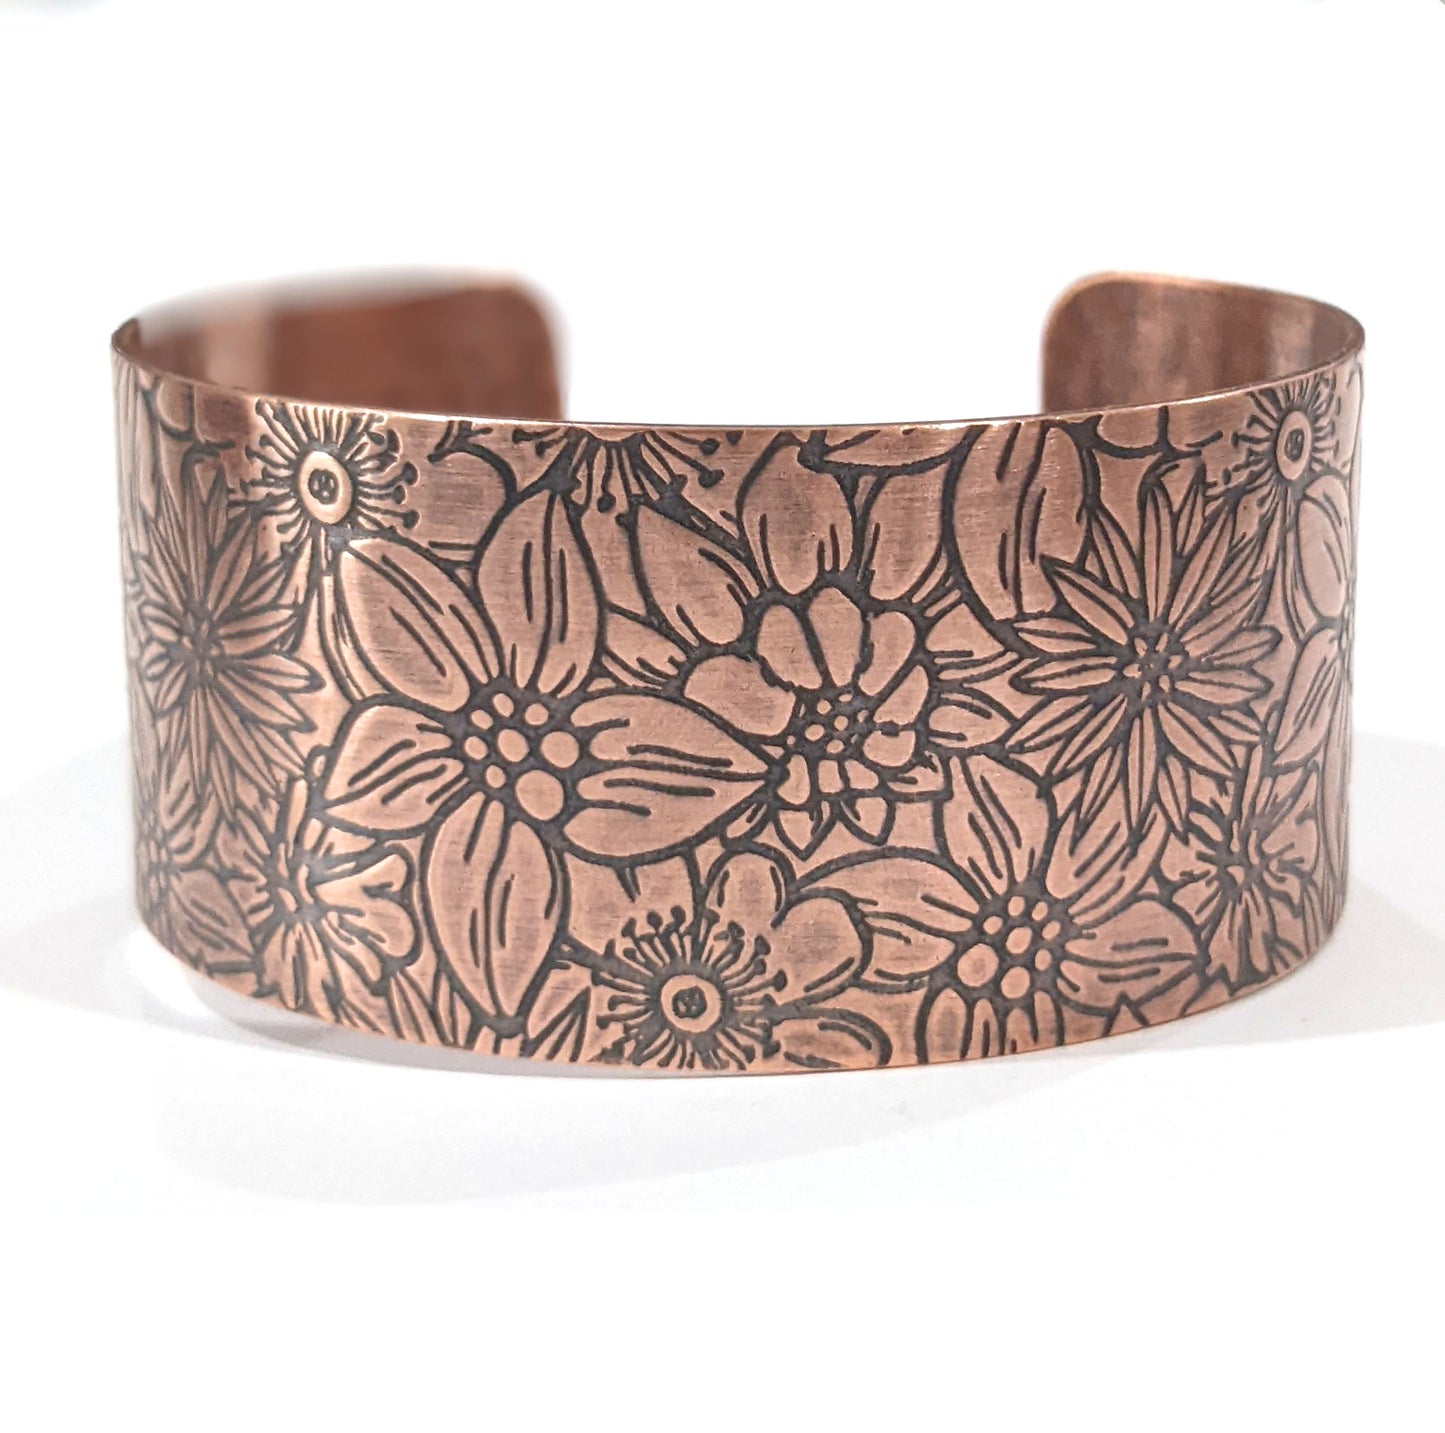 Wide copper bracelet with impressed design of flowers. The entire cuff is covered in various kinds of flowers in full bloom.